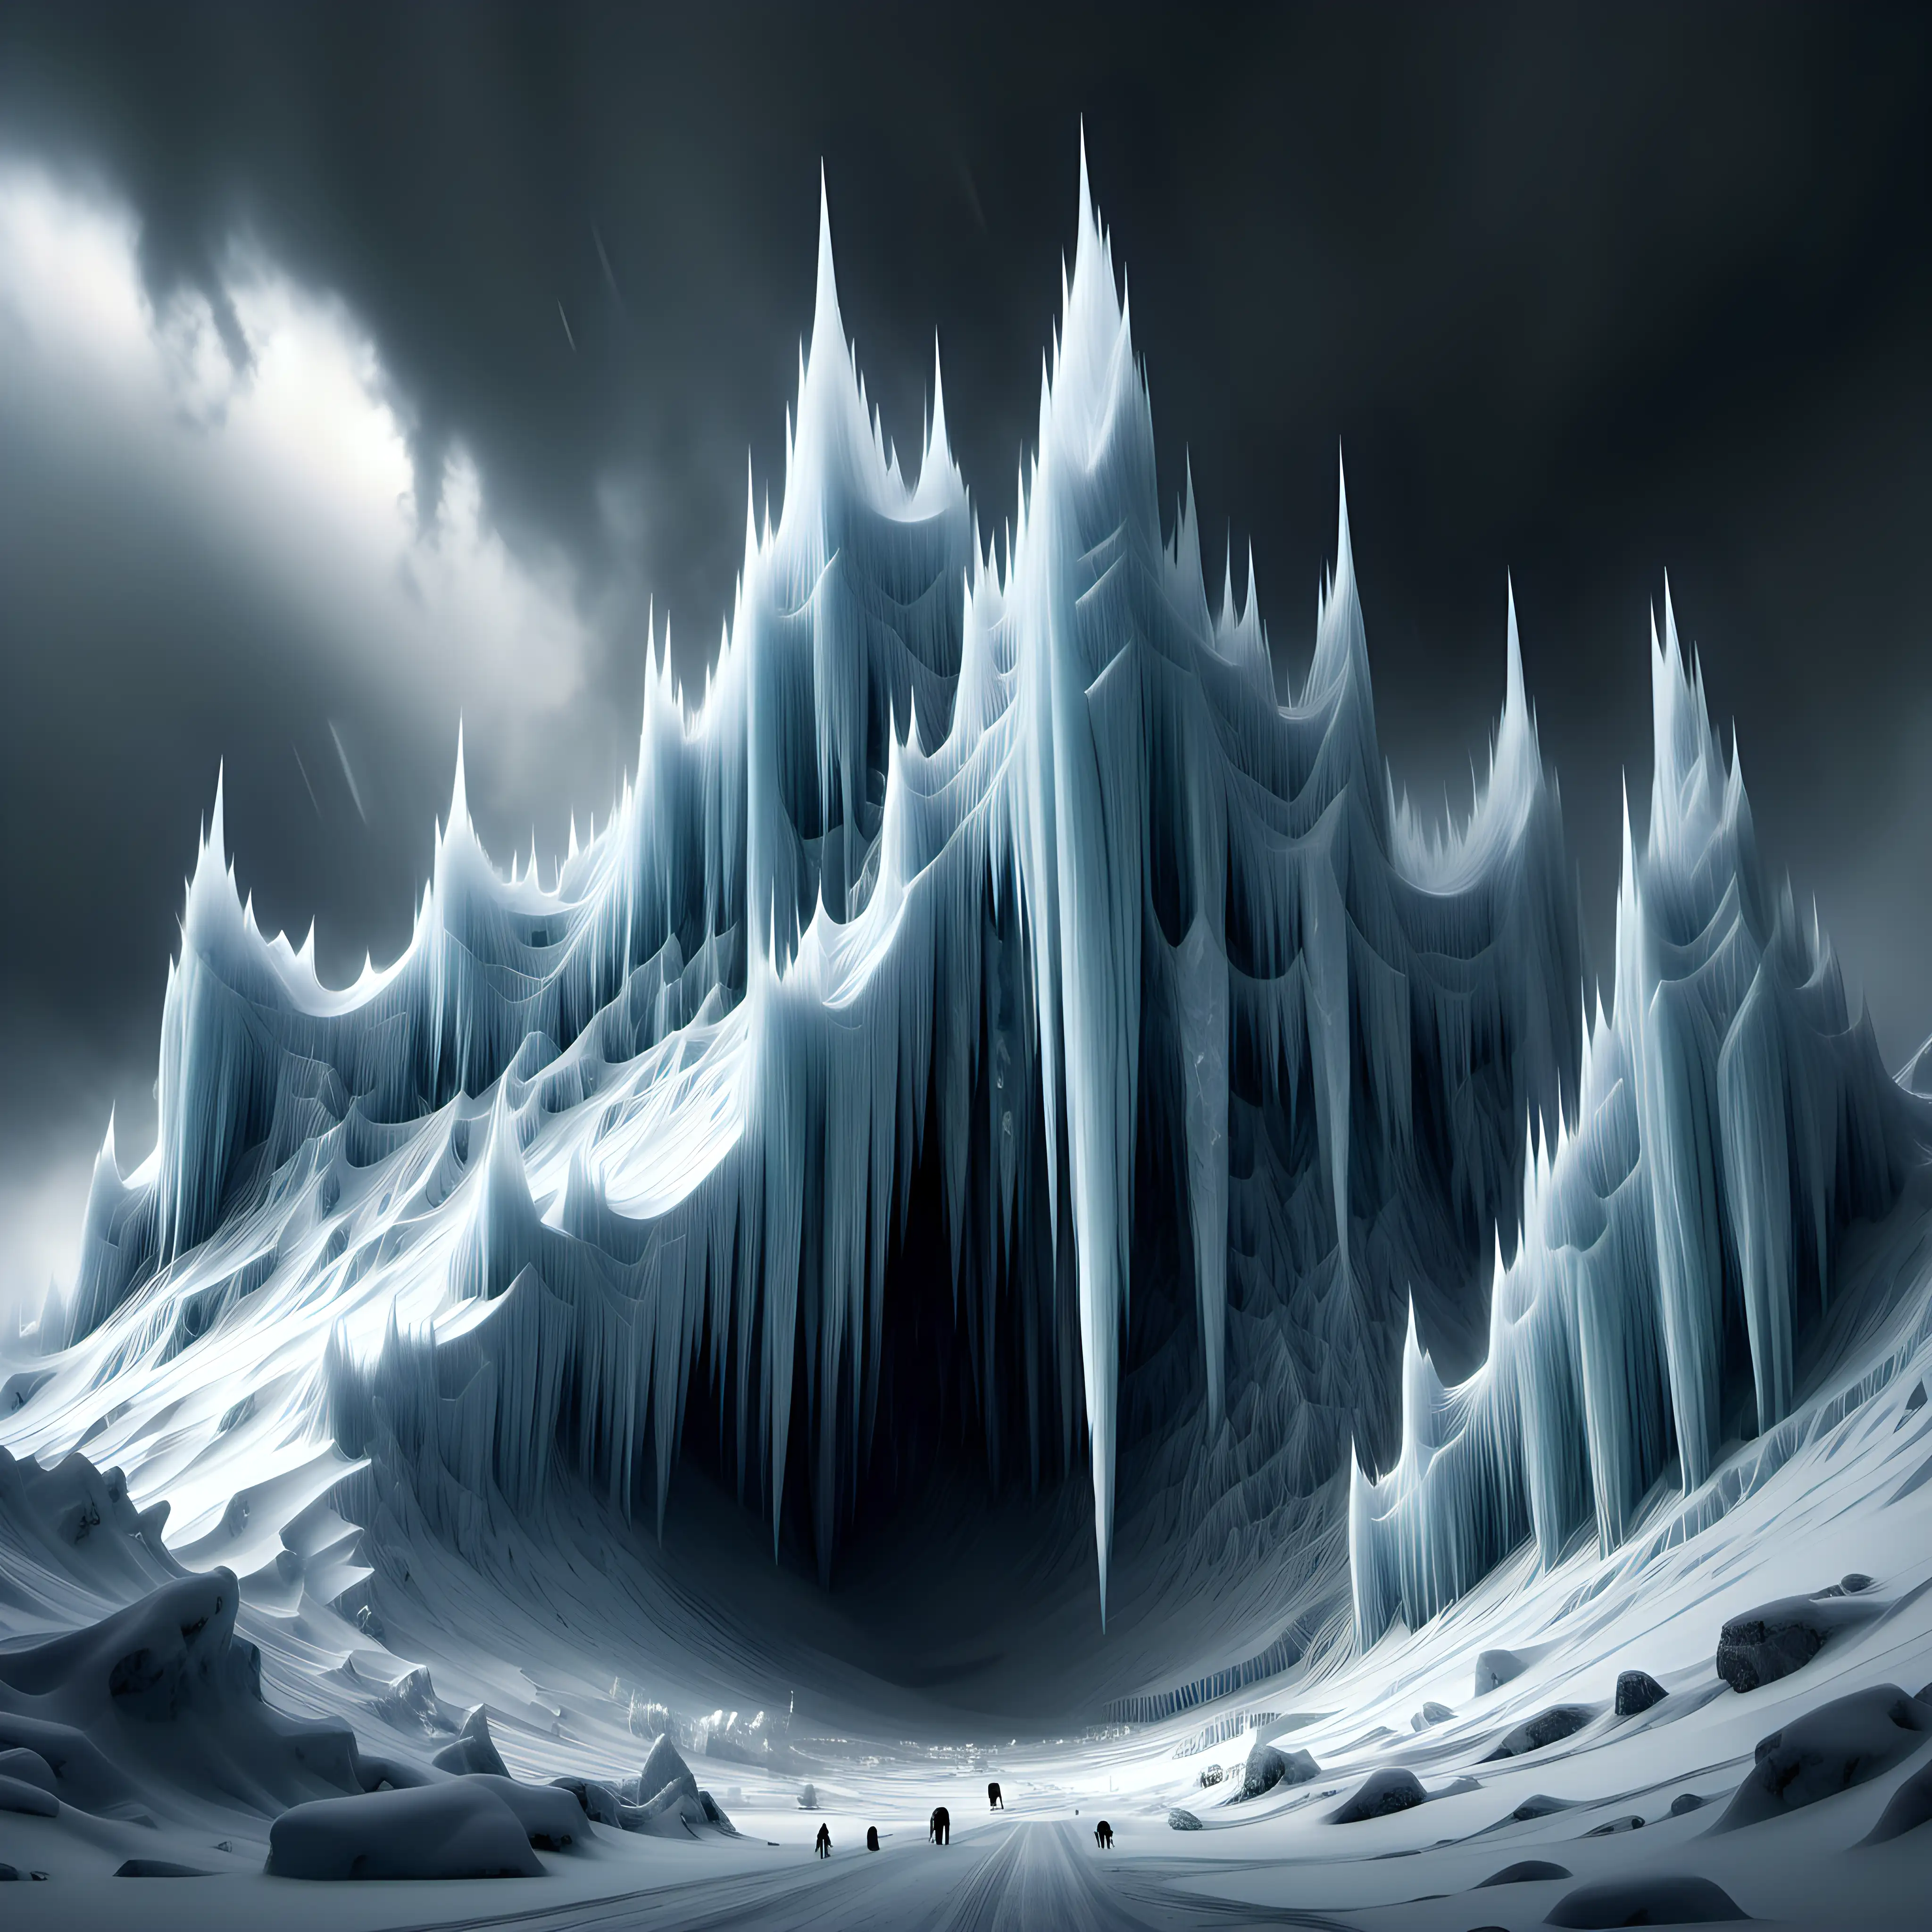 Majestic Ice Castles in a Snowy Mountain Storm